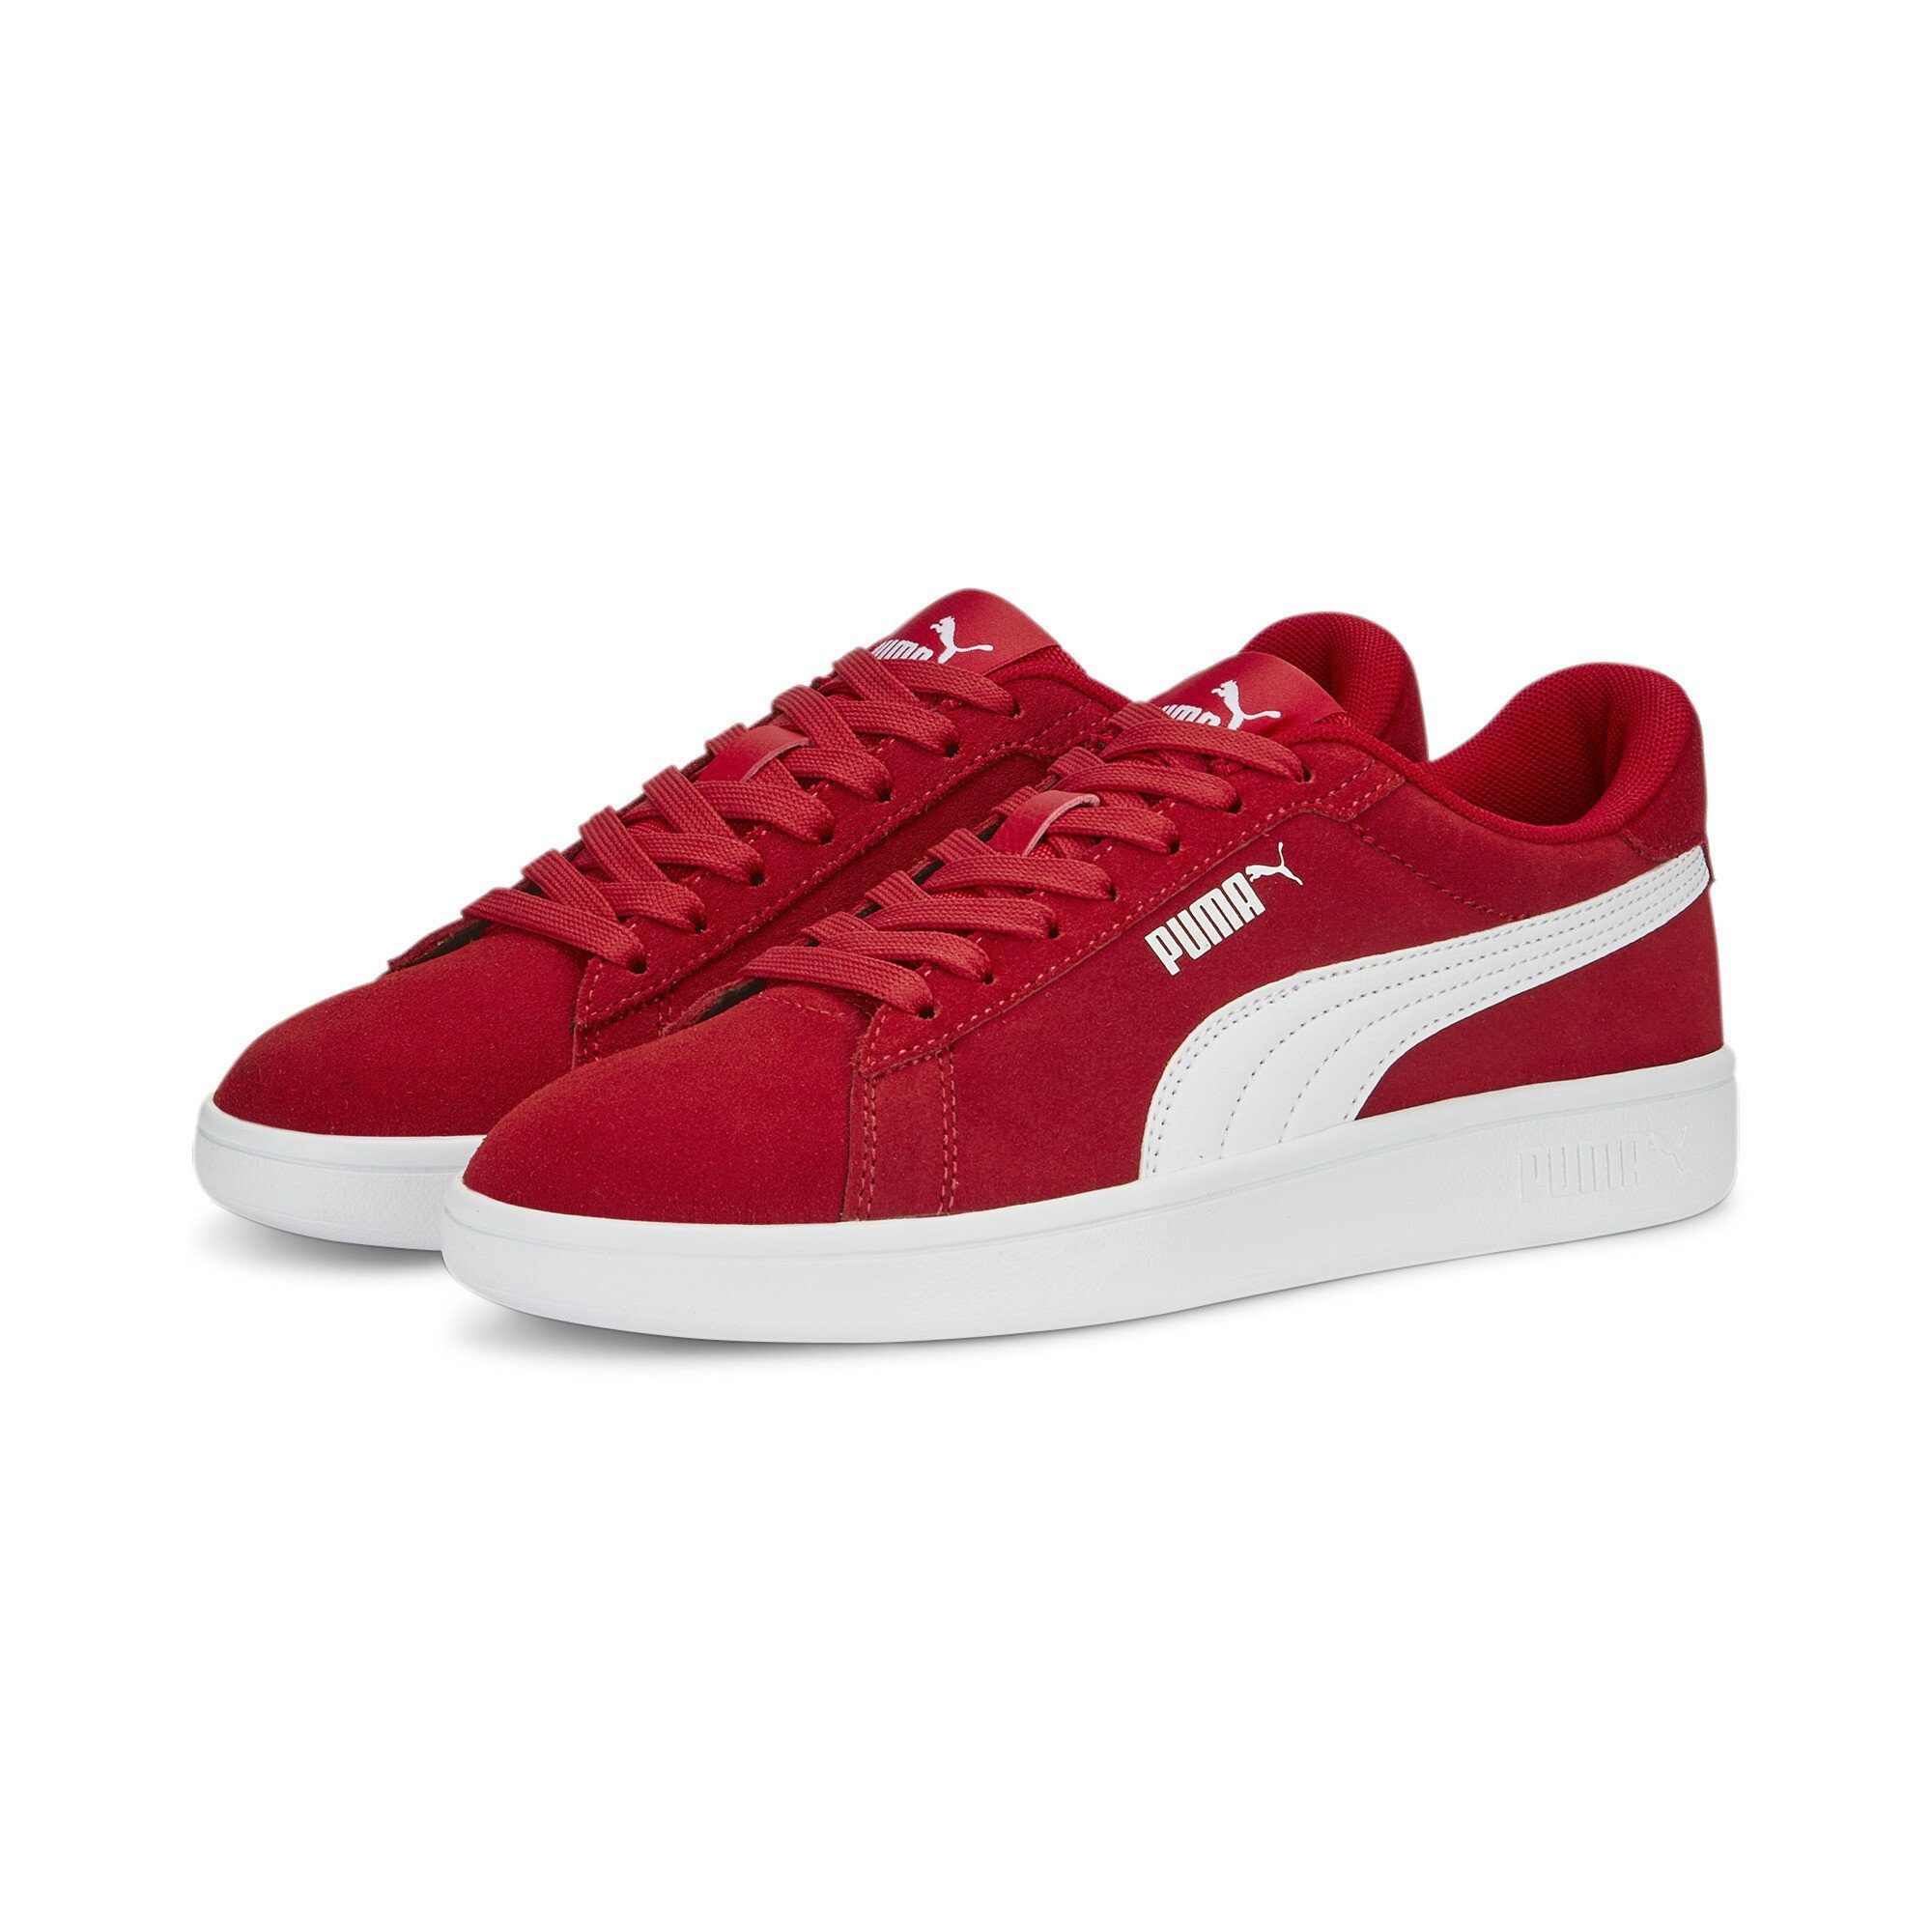 PUMA Smash 3.0 Suede Sneakers Jugendliche Sneaker For All Time Red White